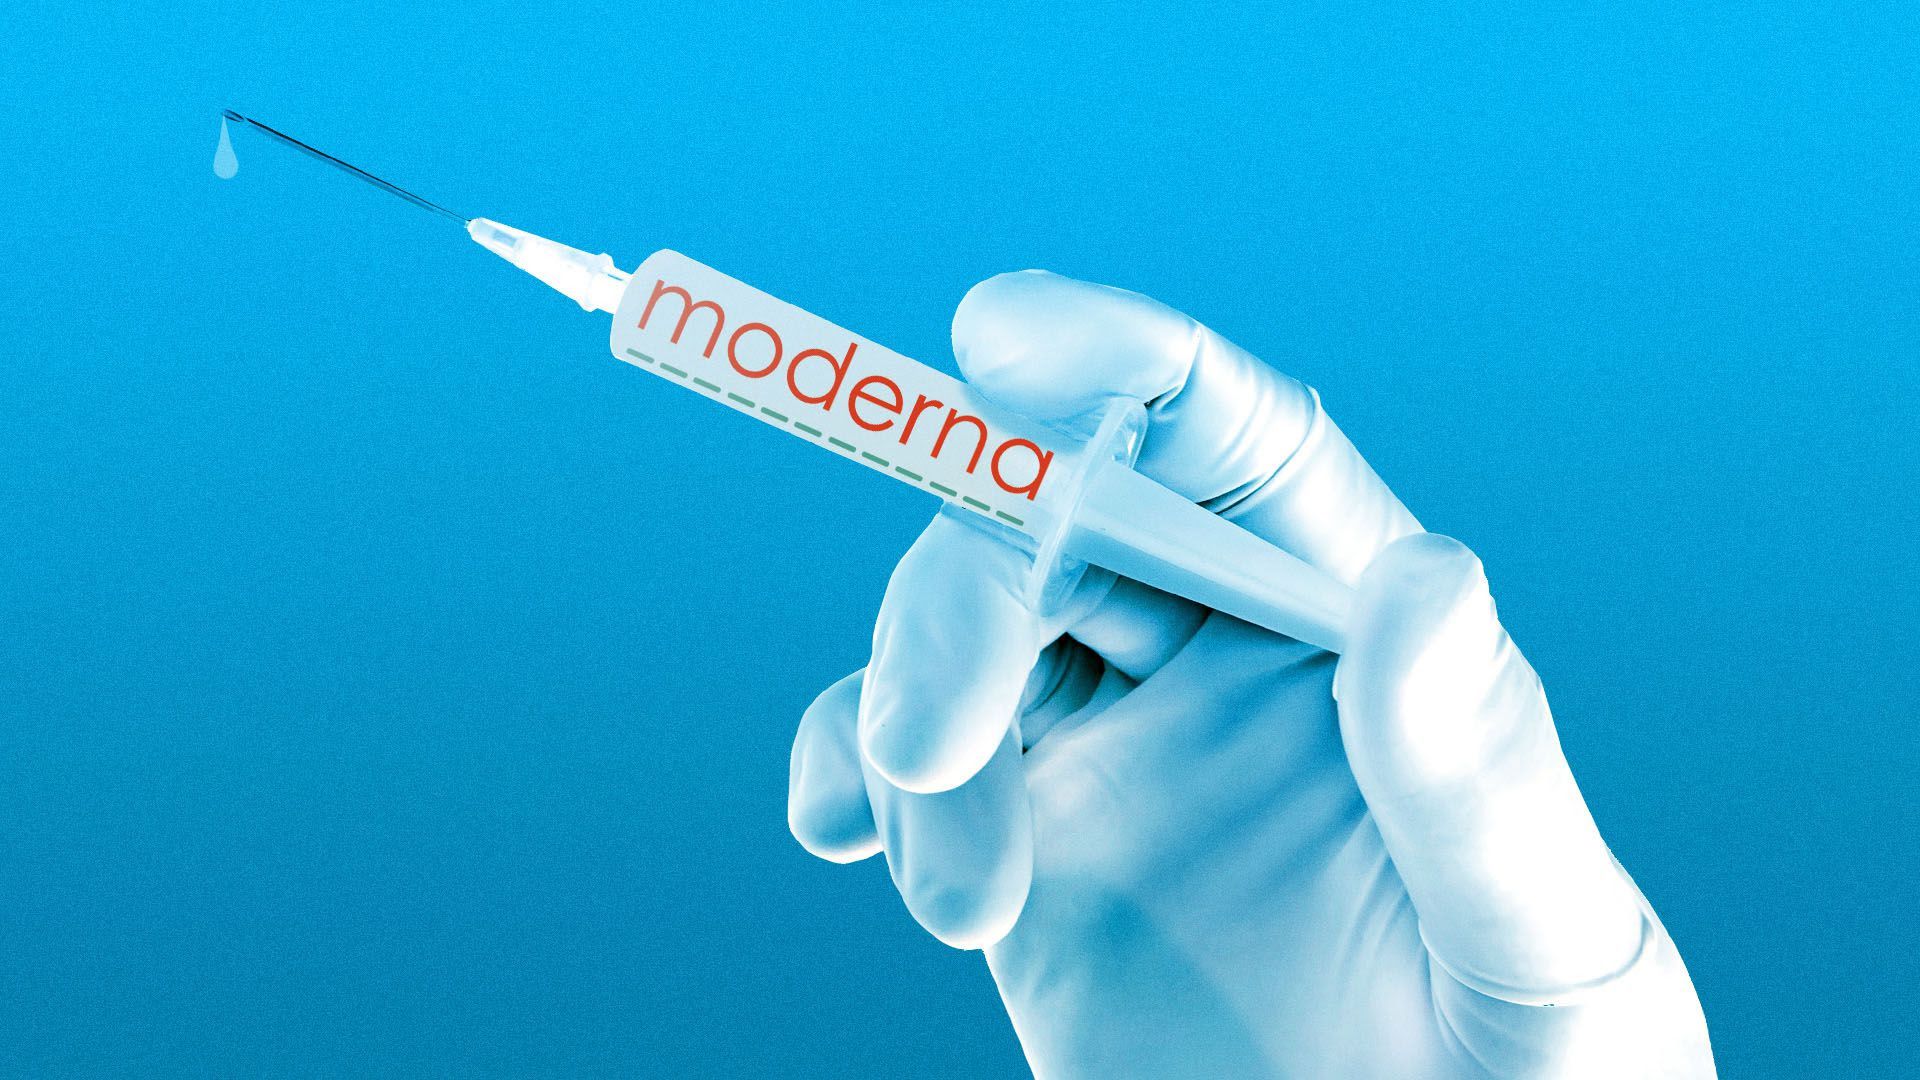 Illustration of a vaccine with Modera written on it